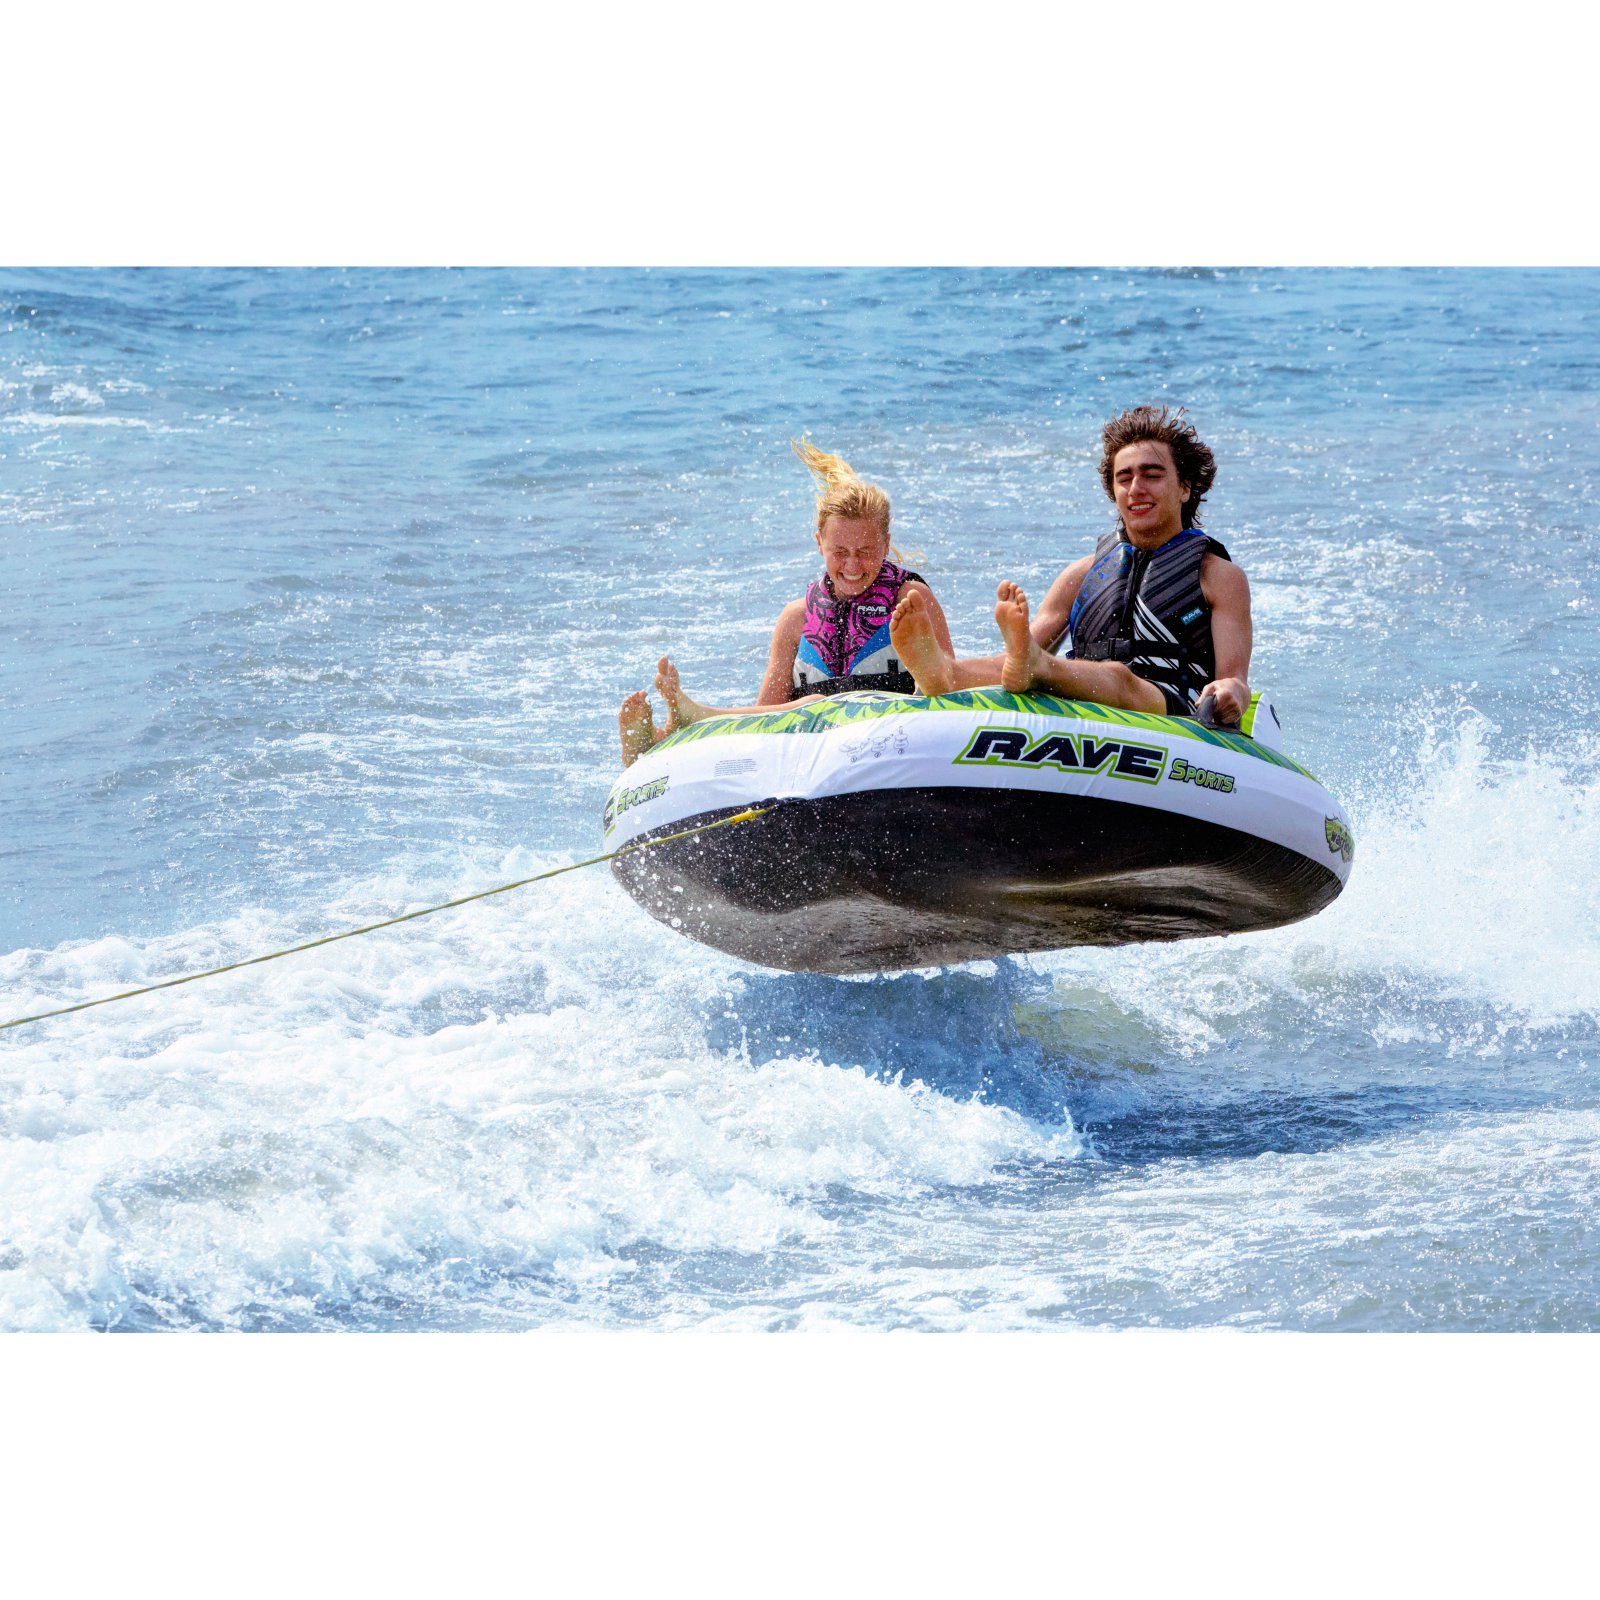 RAVE Sports Warrior II Double Seat Inflatable Towable Tube, Green - image 2 of 3